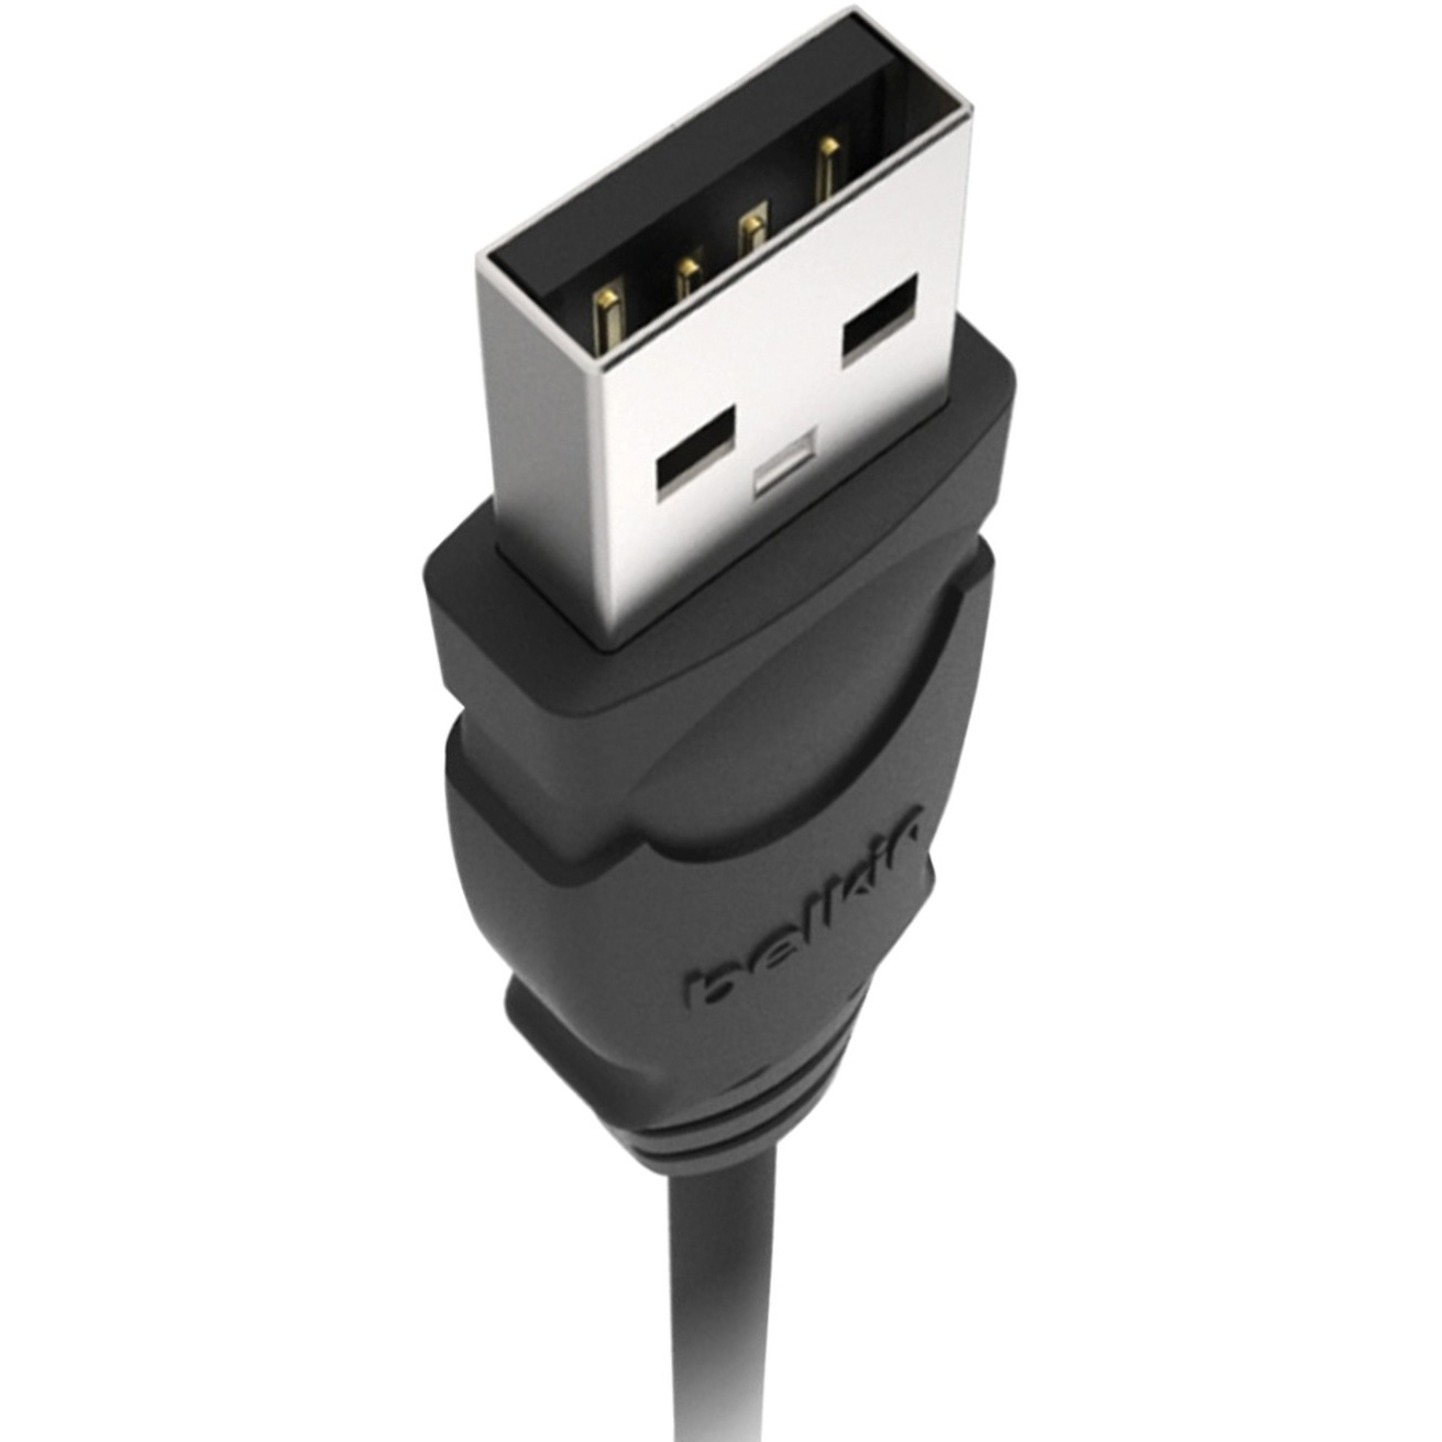 Belkin F3U133B10 10 ft. Hi-Speed Type A Male USB 2.0 to Type B Male USB 2.0 Cable - image 2 of 3